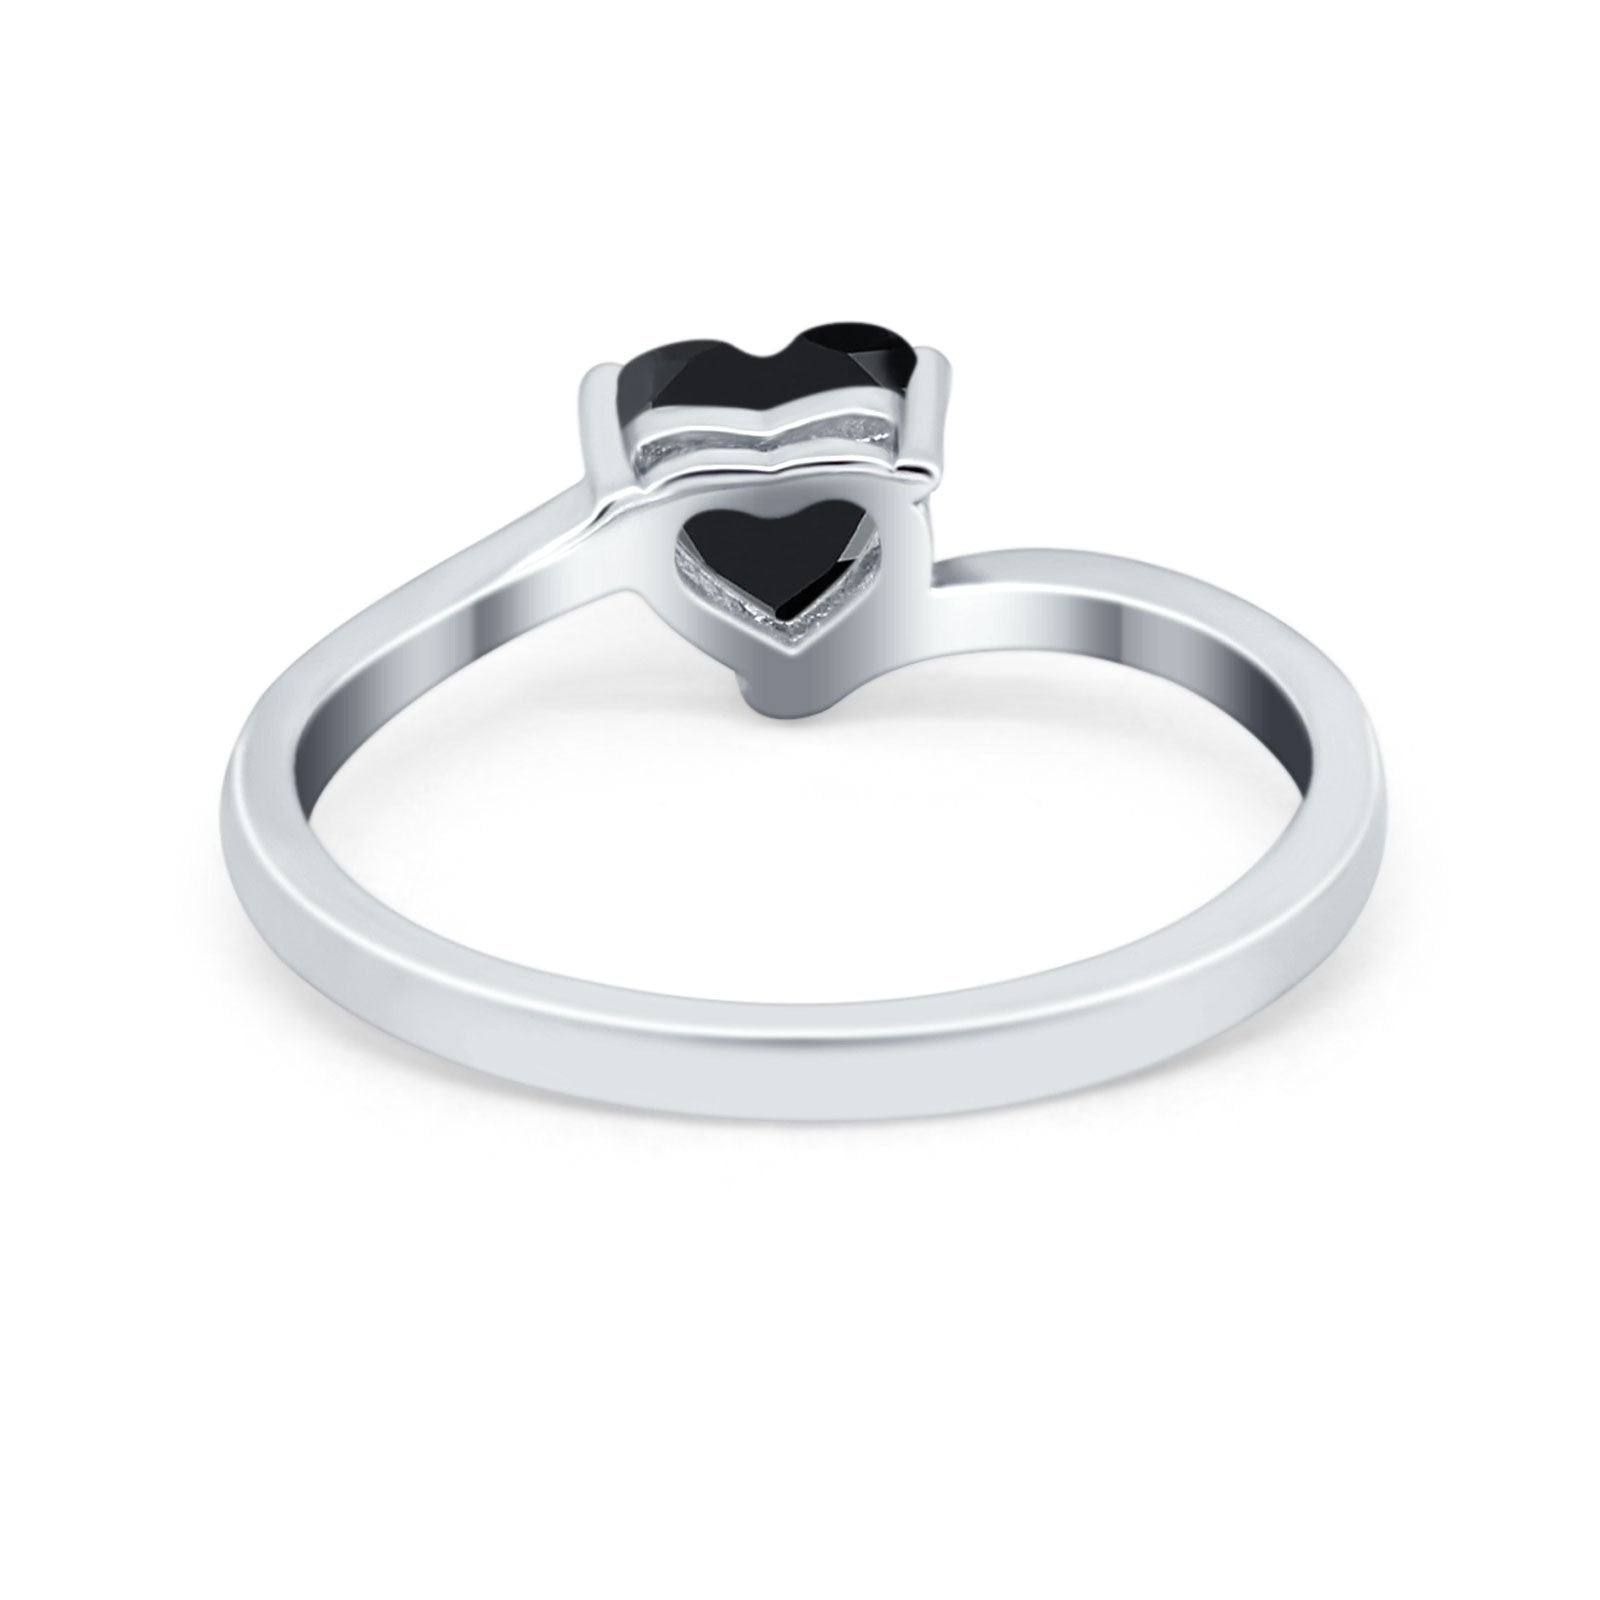 Swirl Wedding Heart Promise Ring Simulated Cubic Zirconia 925 Sterling Silver